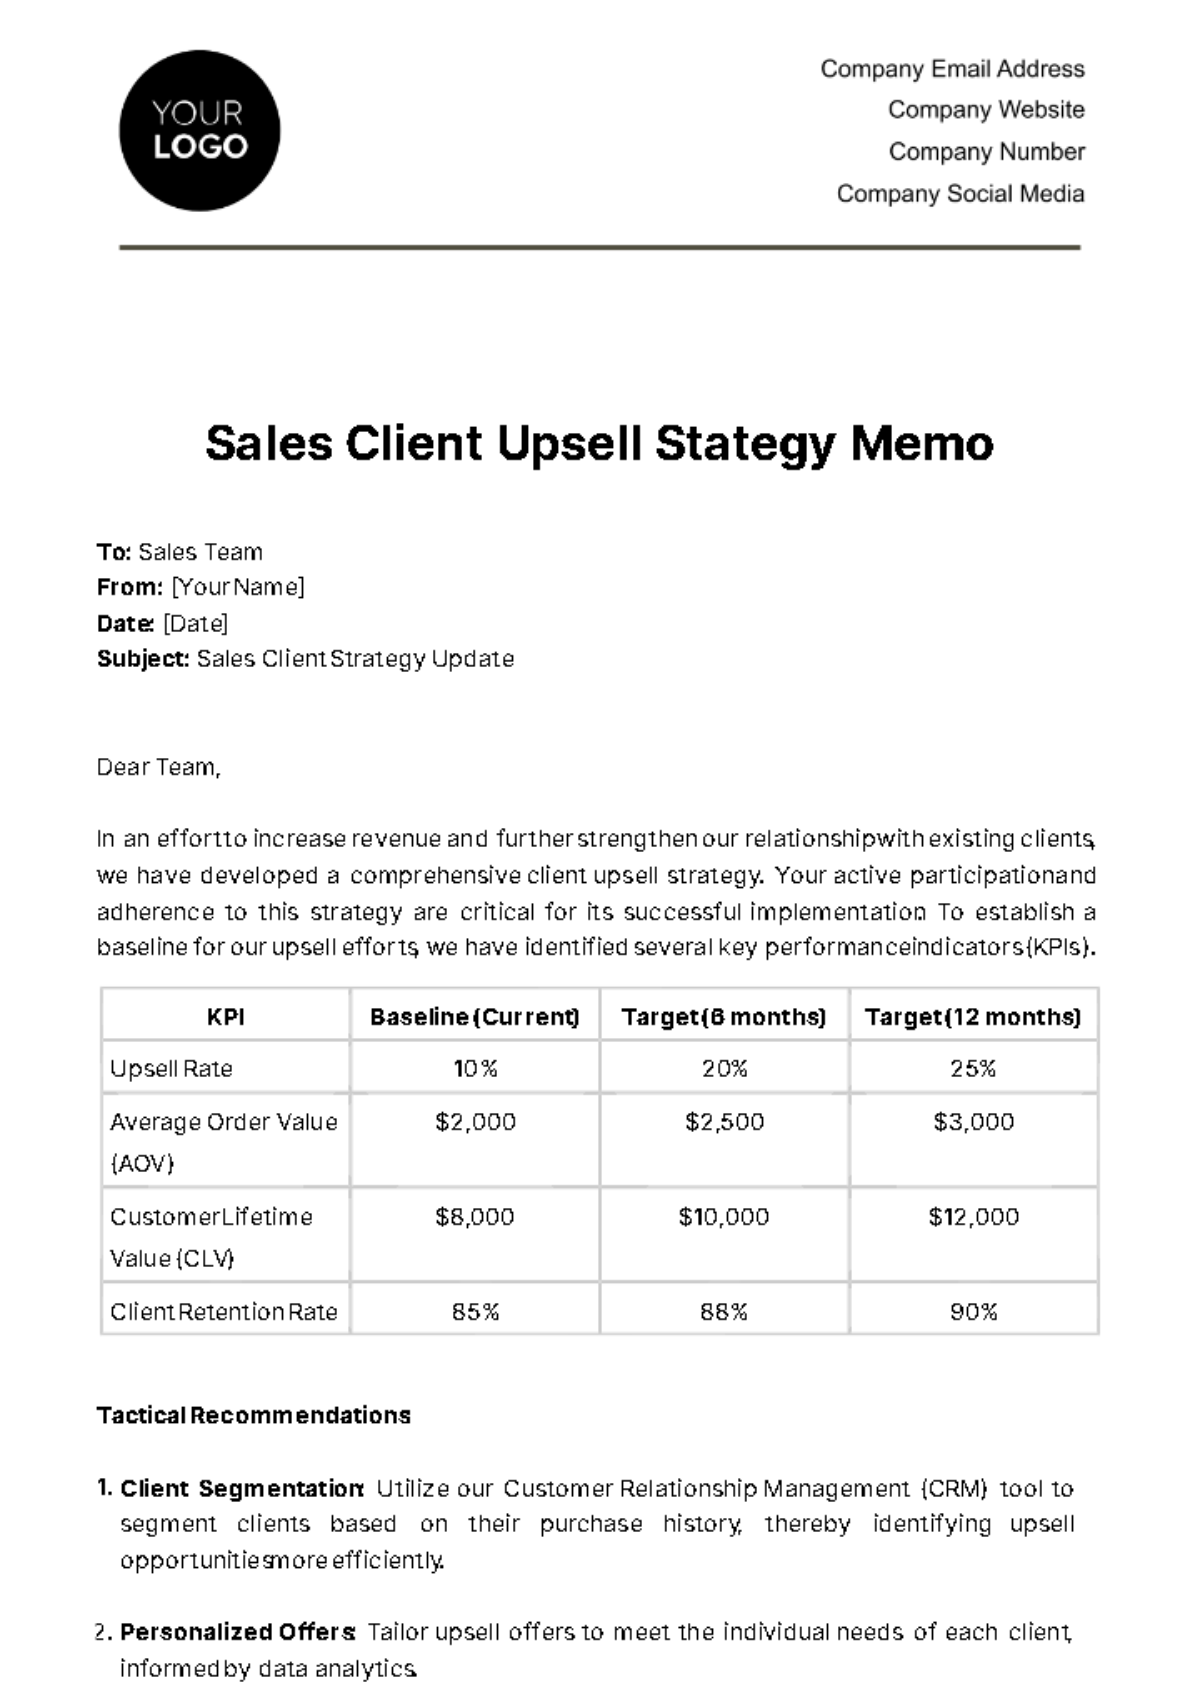 Free Sales Client Upsell Strategy Memo Template